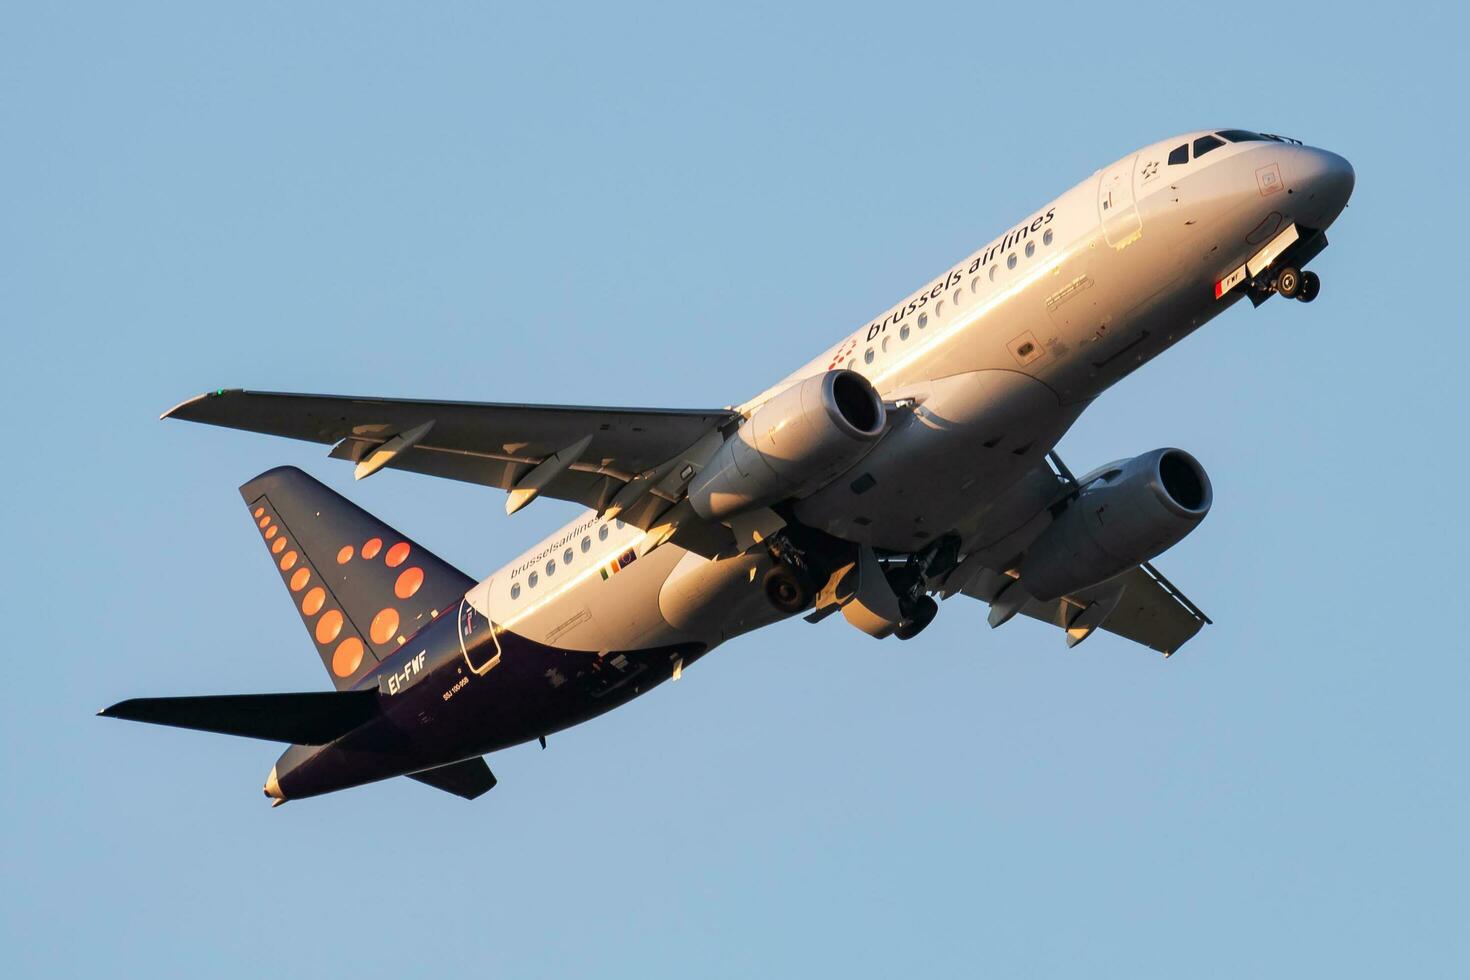 Brussels Airlines Sukhoi SSJ-100 Superjet EI-FWF passenger plane departure and take off at Vienna Airport photo